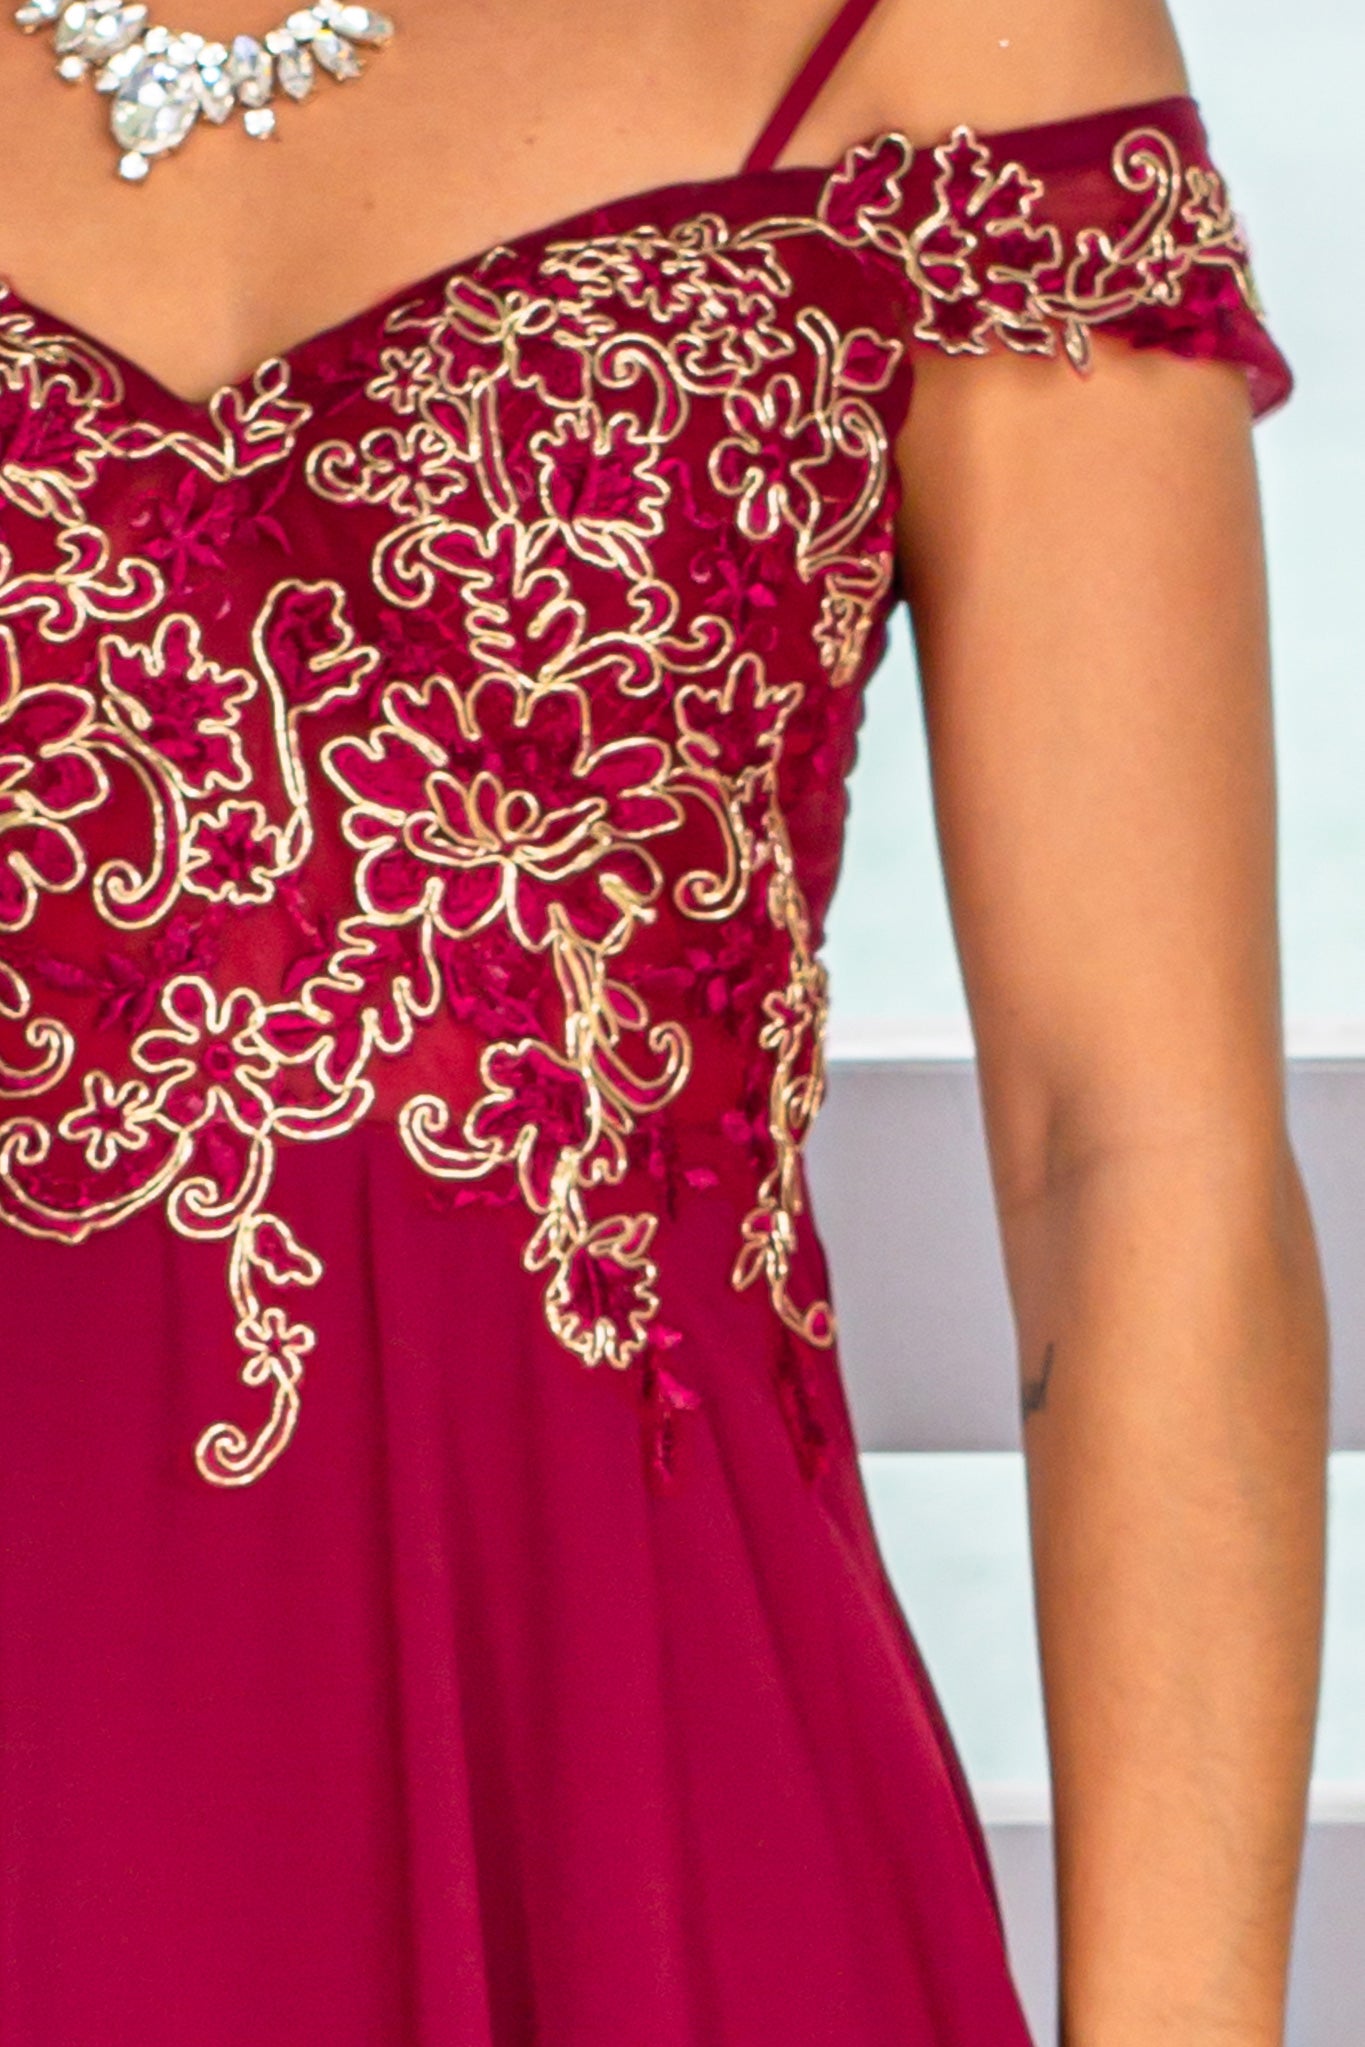 Burgundy Maxi Dress with Gold Details